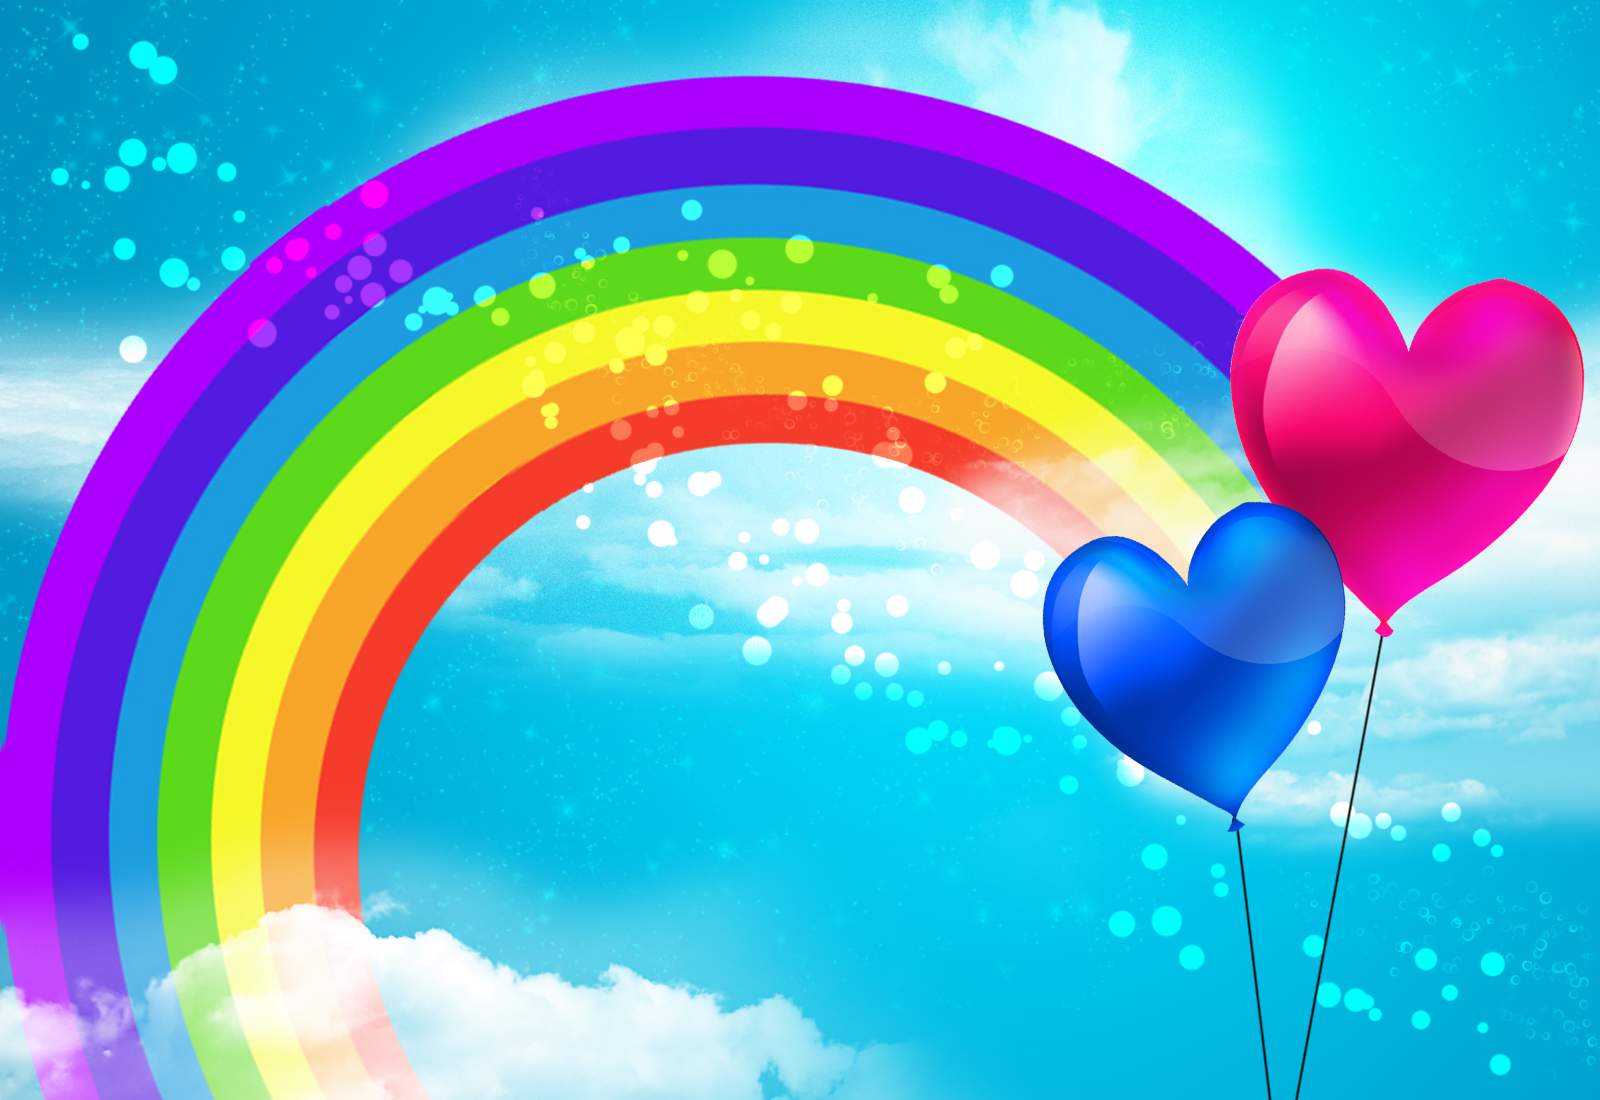 Rainbows Images Collection HD Wallpaper